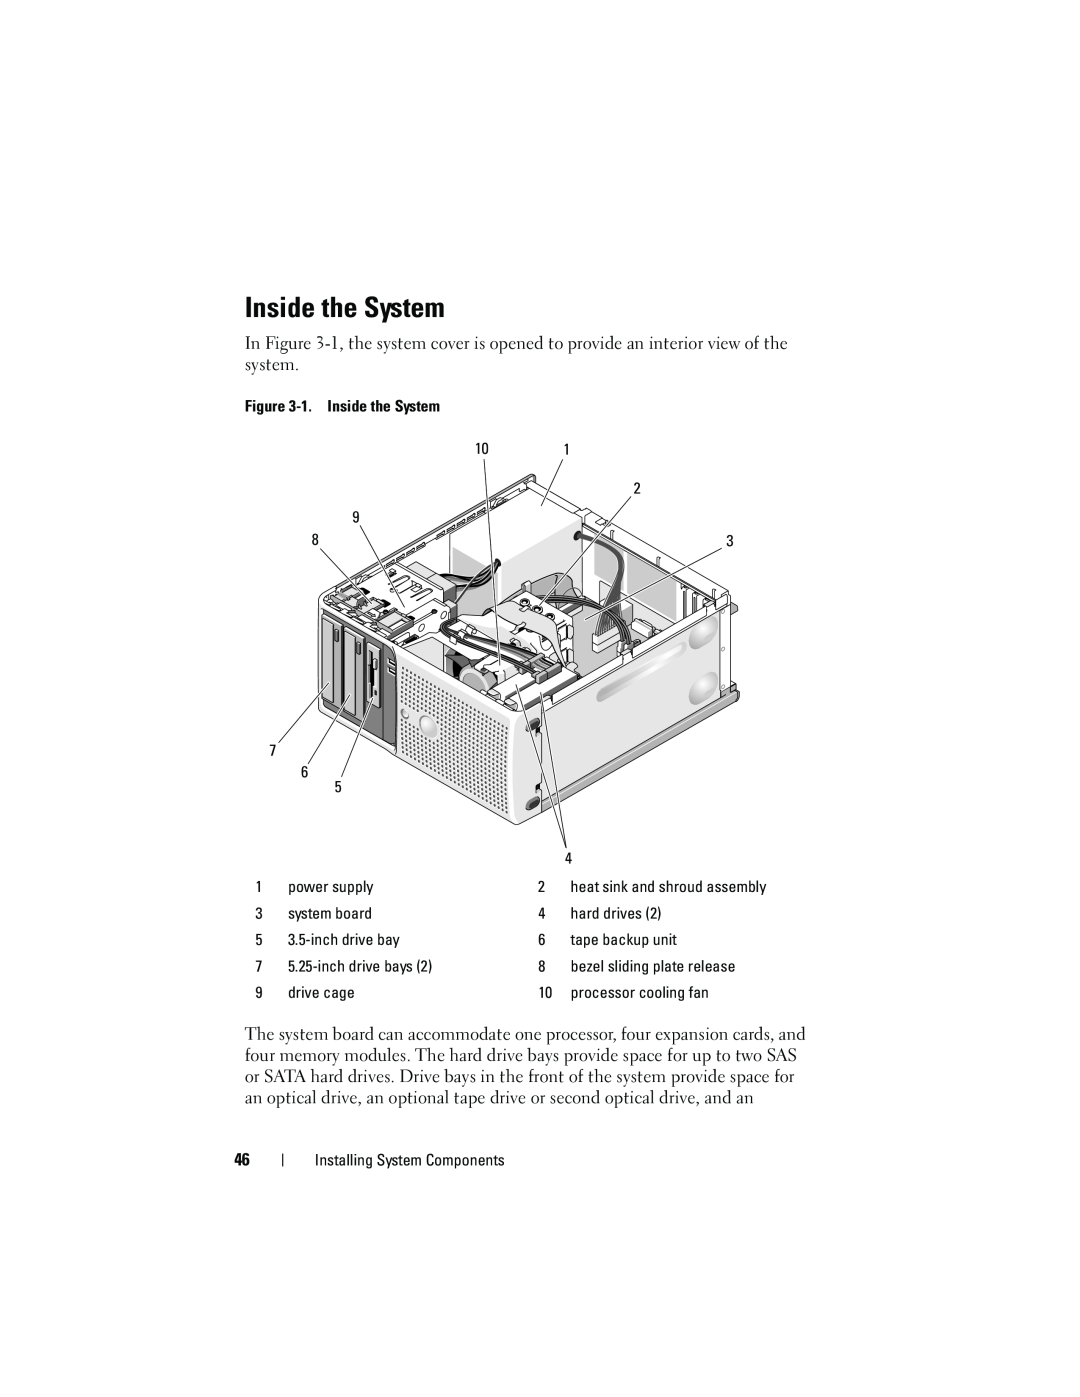 Dell T105 owner manual Inside the System, heat sink and shroud assembly 